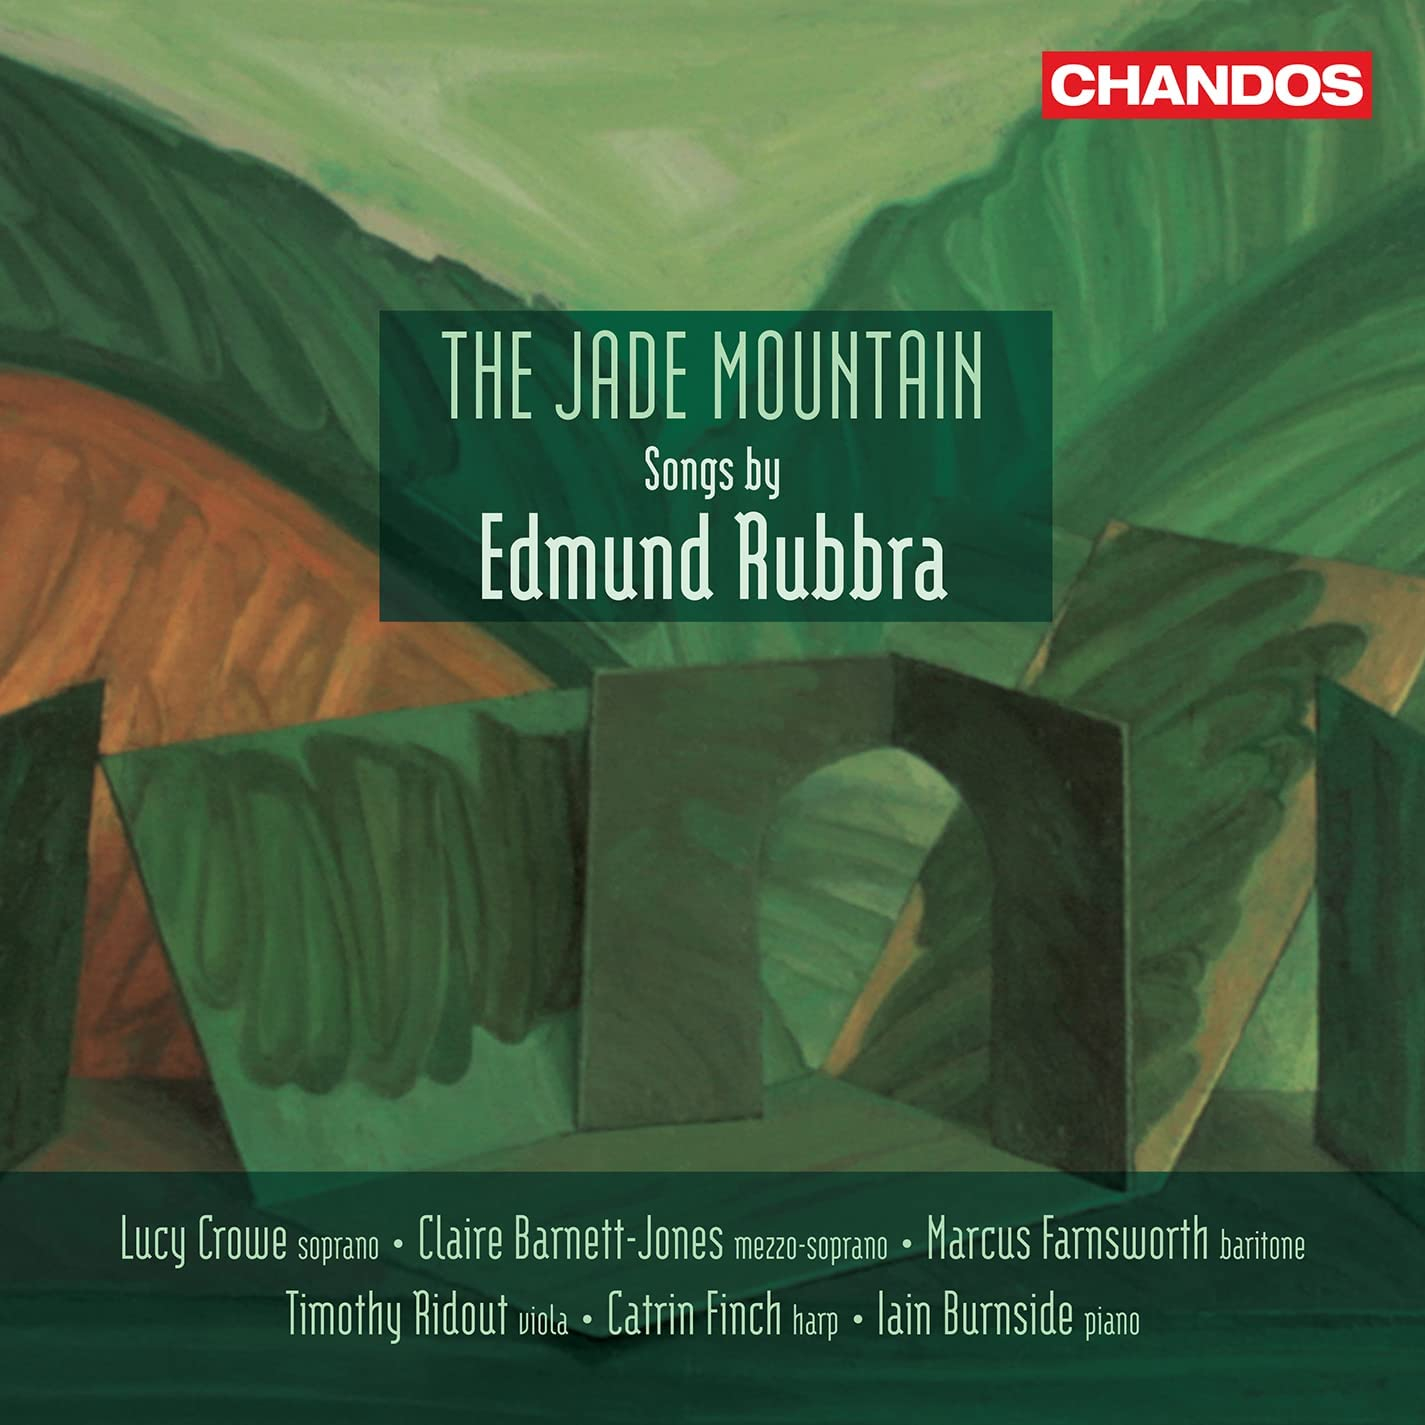 THE JADE MOUNTAIN – SONGS BY EDMUND RUBBRA